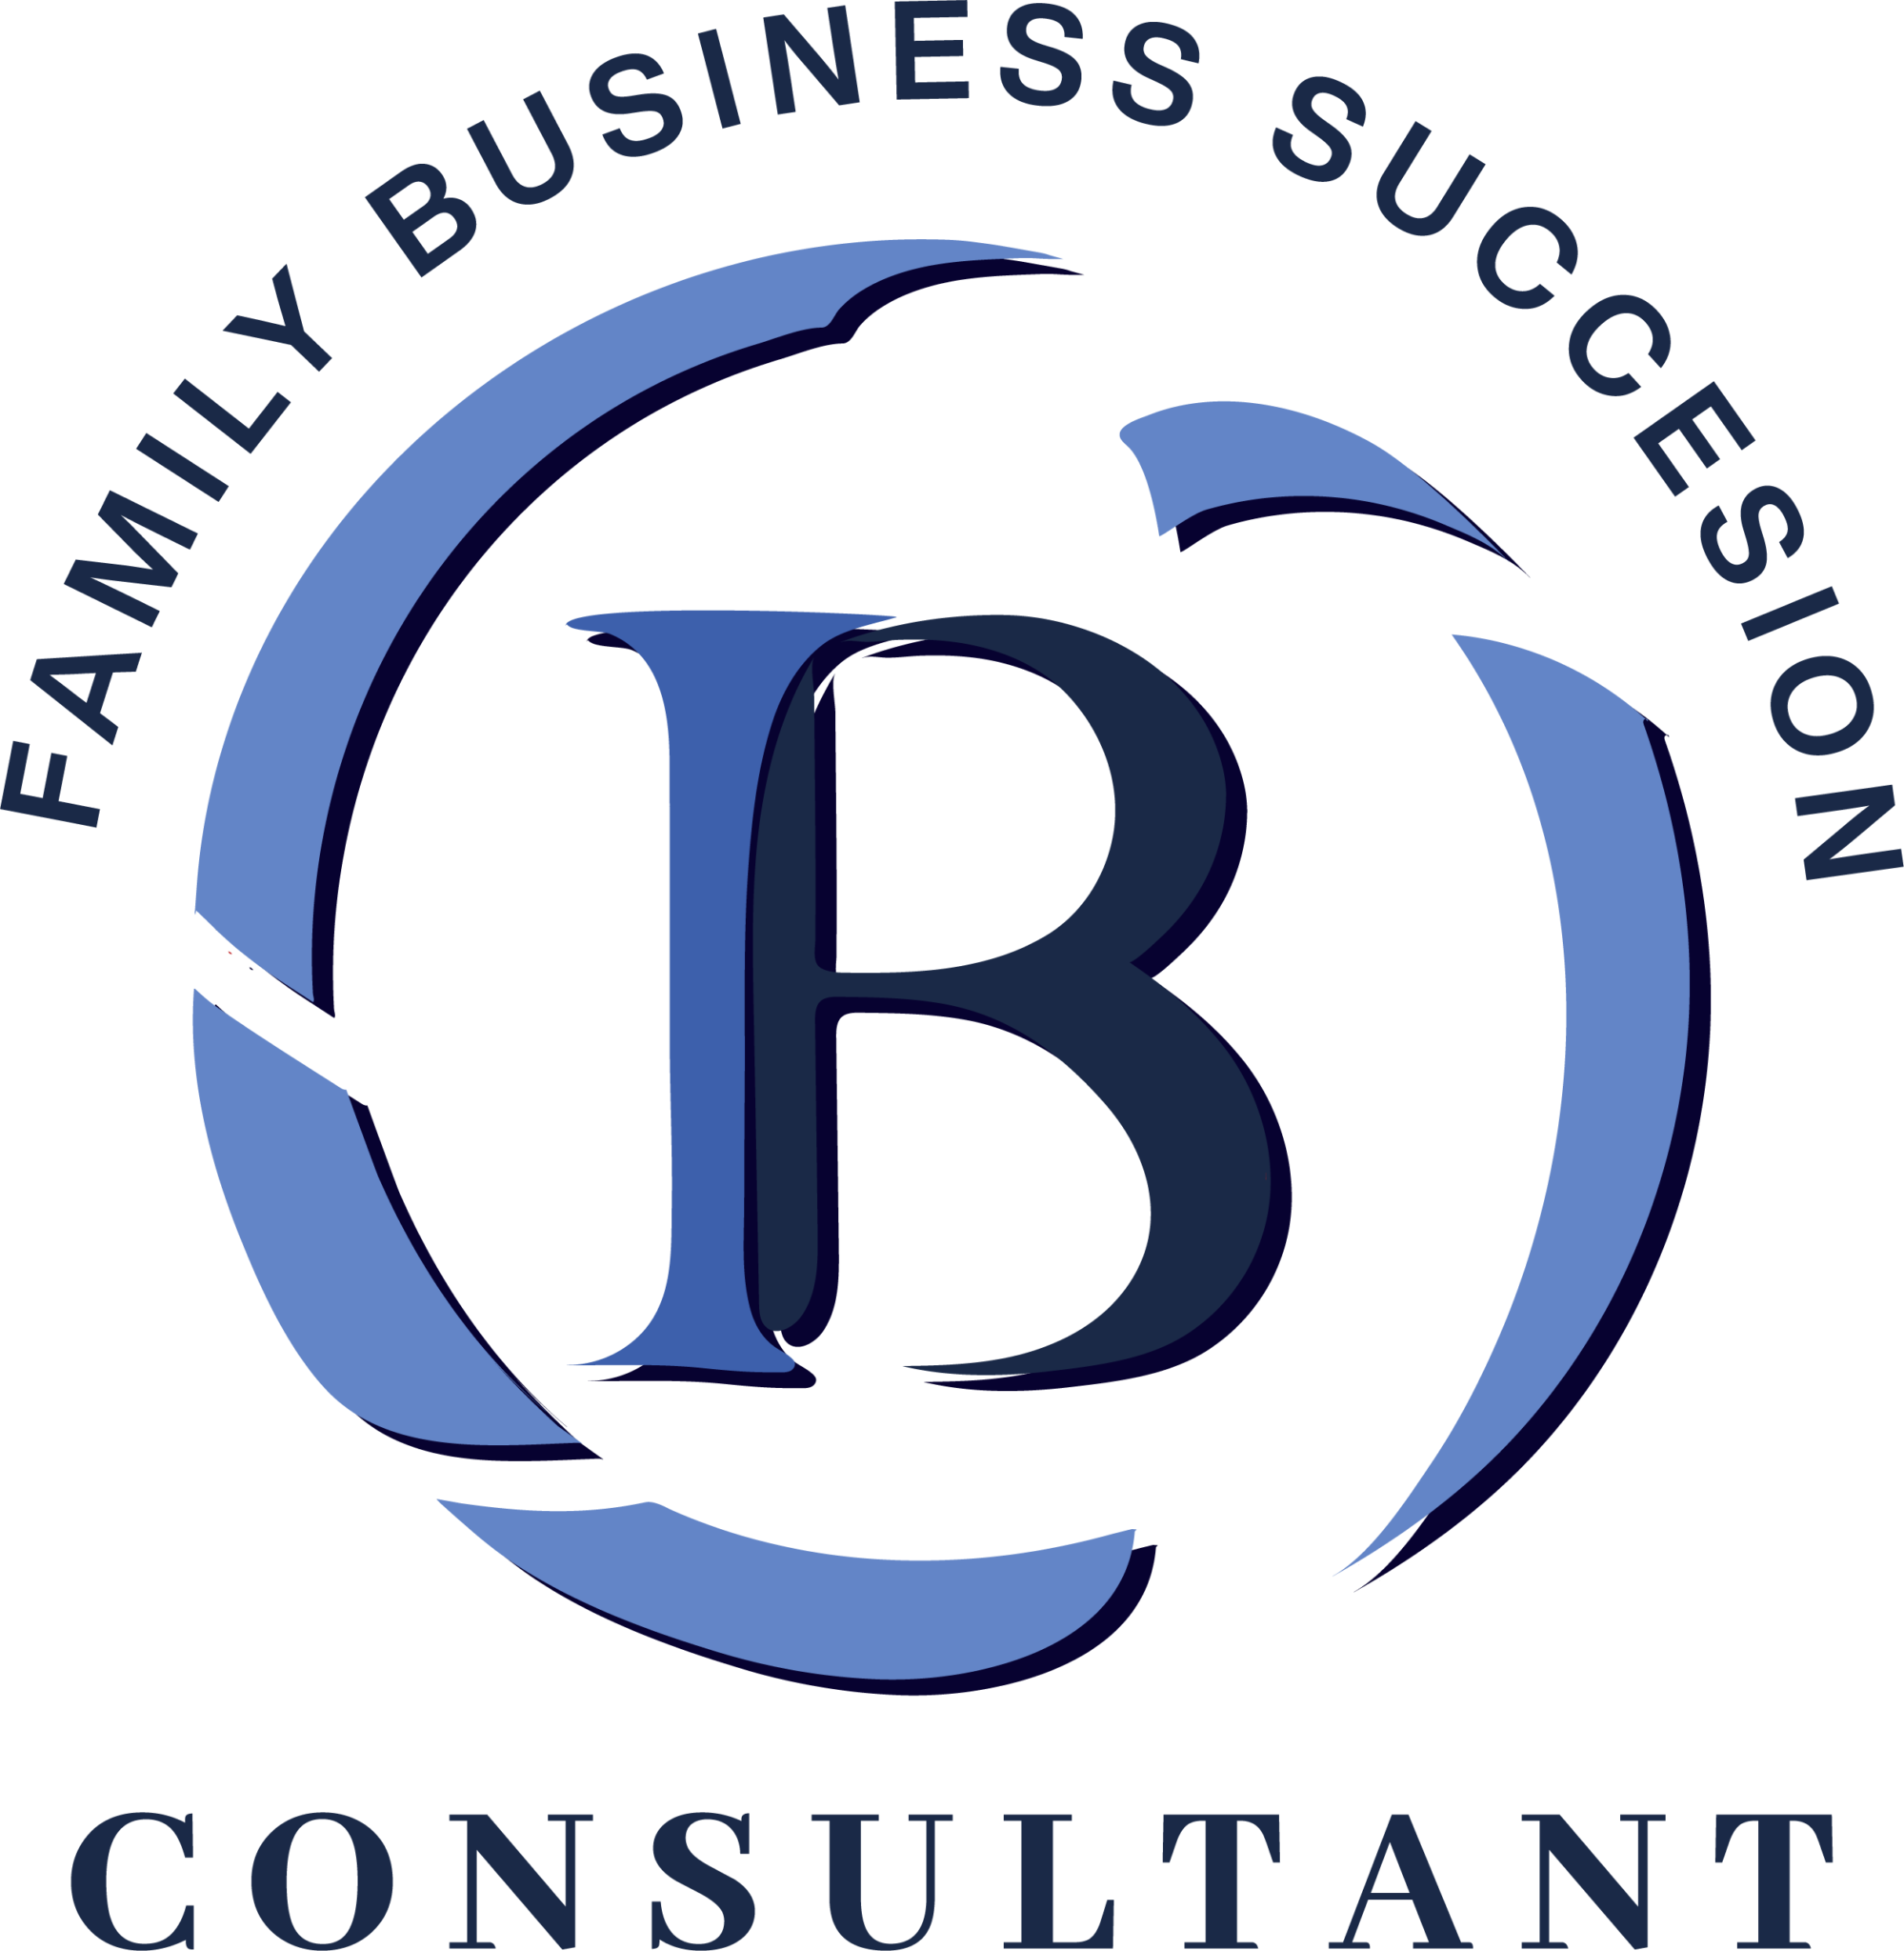 FBS Consultant